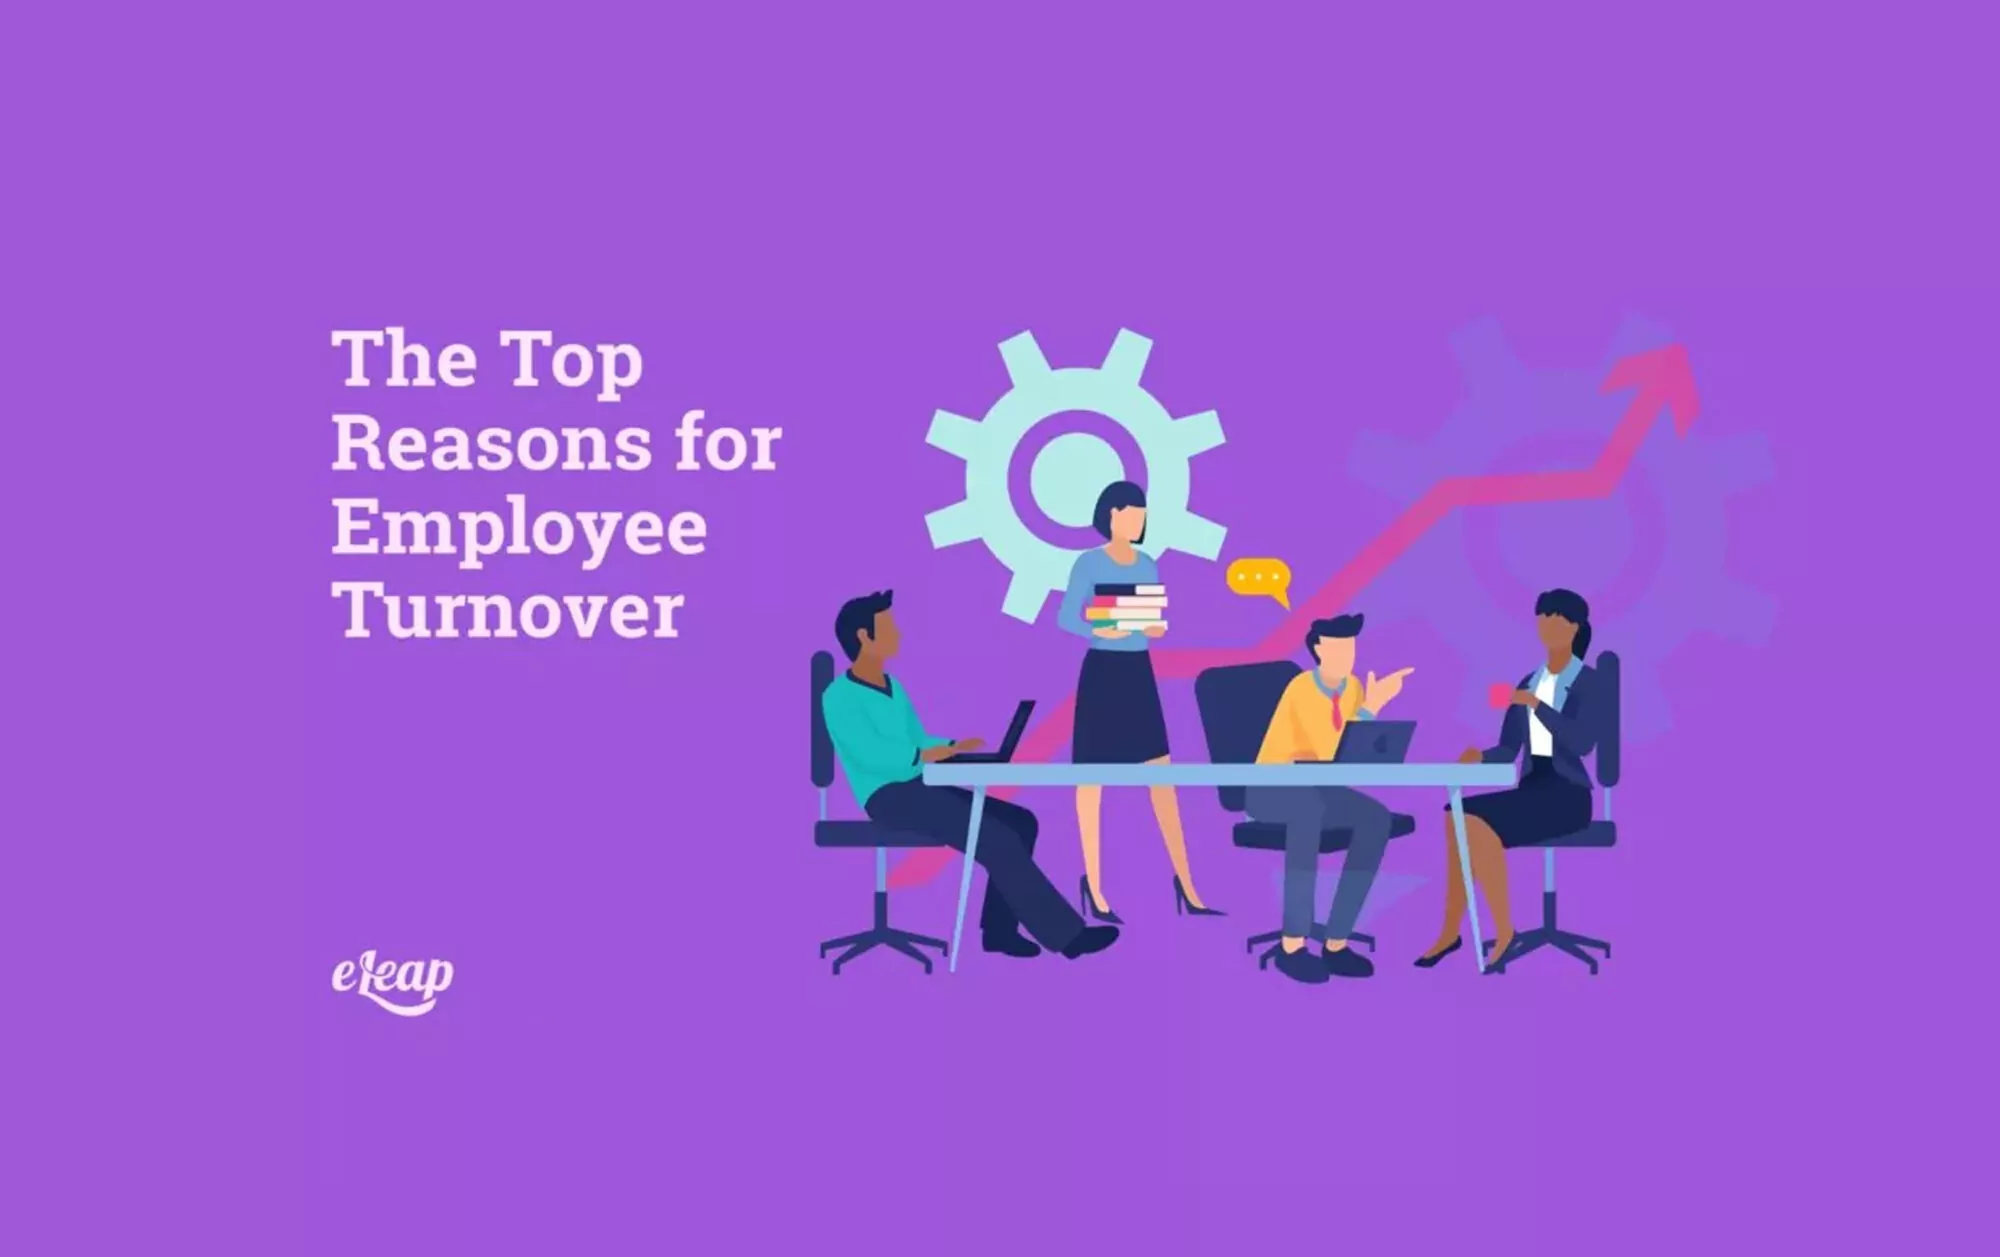 The Top Reasons for Employee Turnover